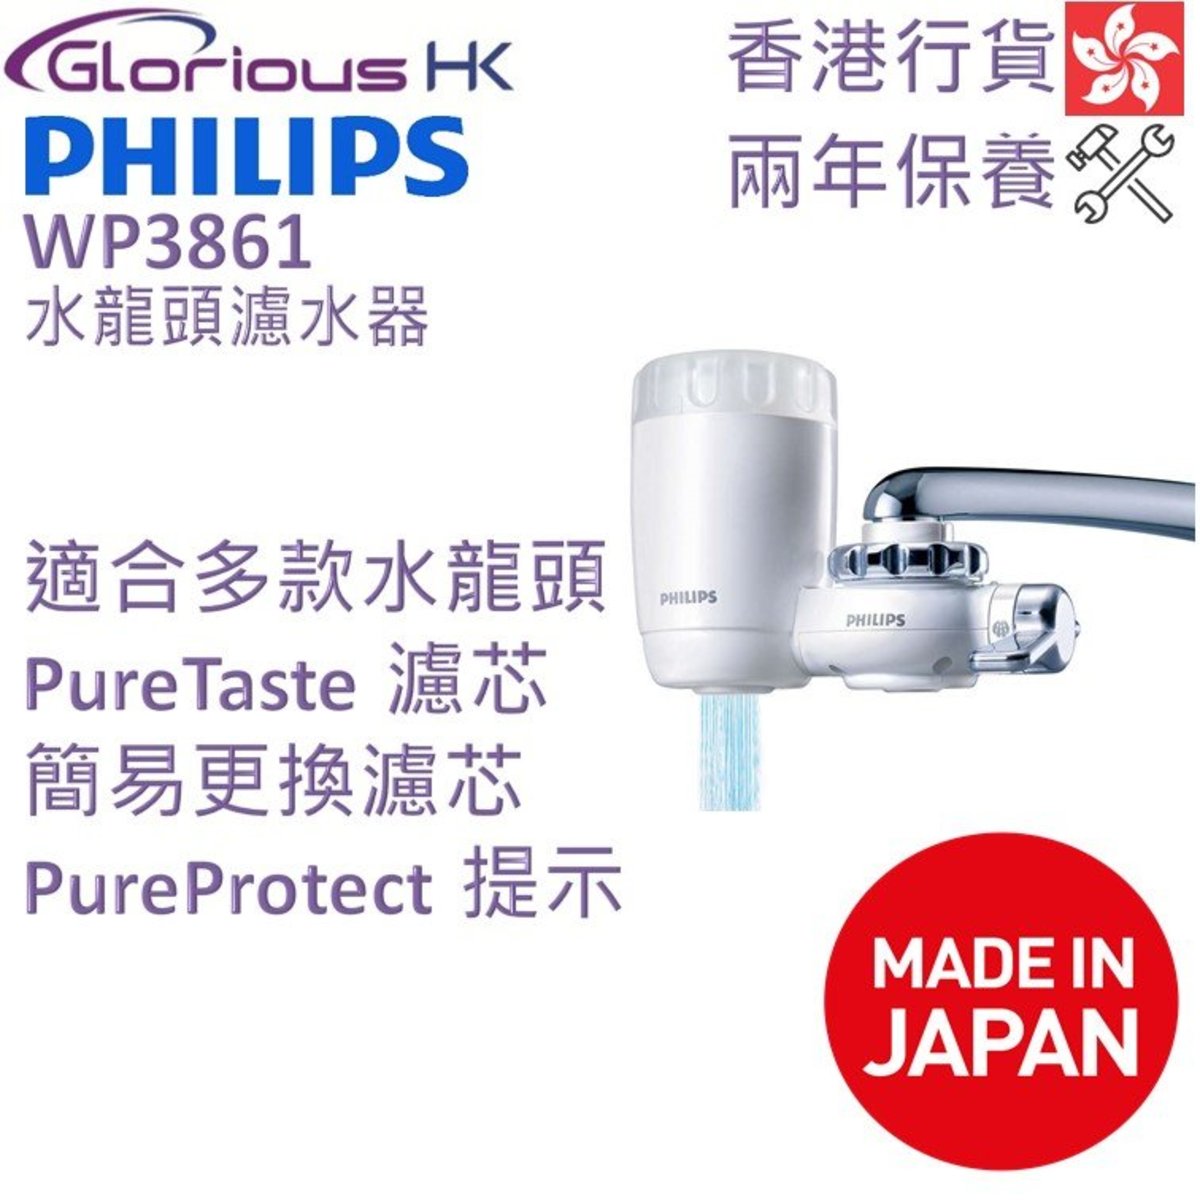 Details about   Philips WP3961 Pure Taste Replacement Filter Cartridge for WP3861 Water Purifier